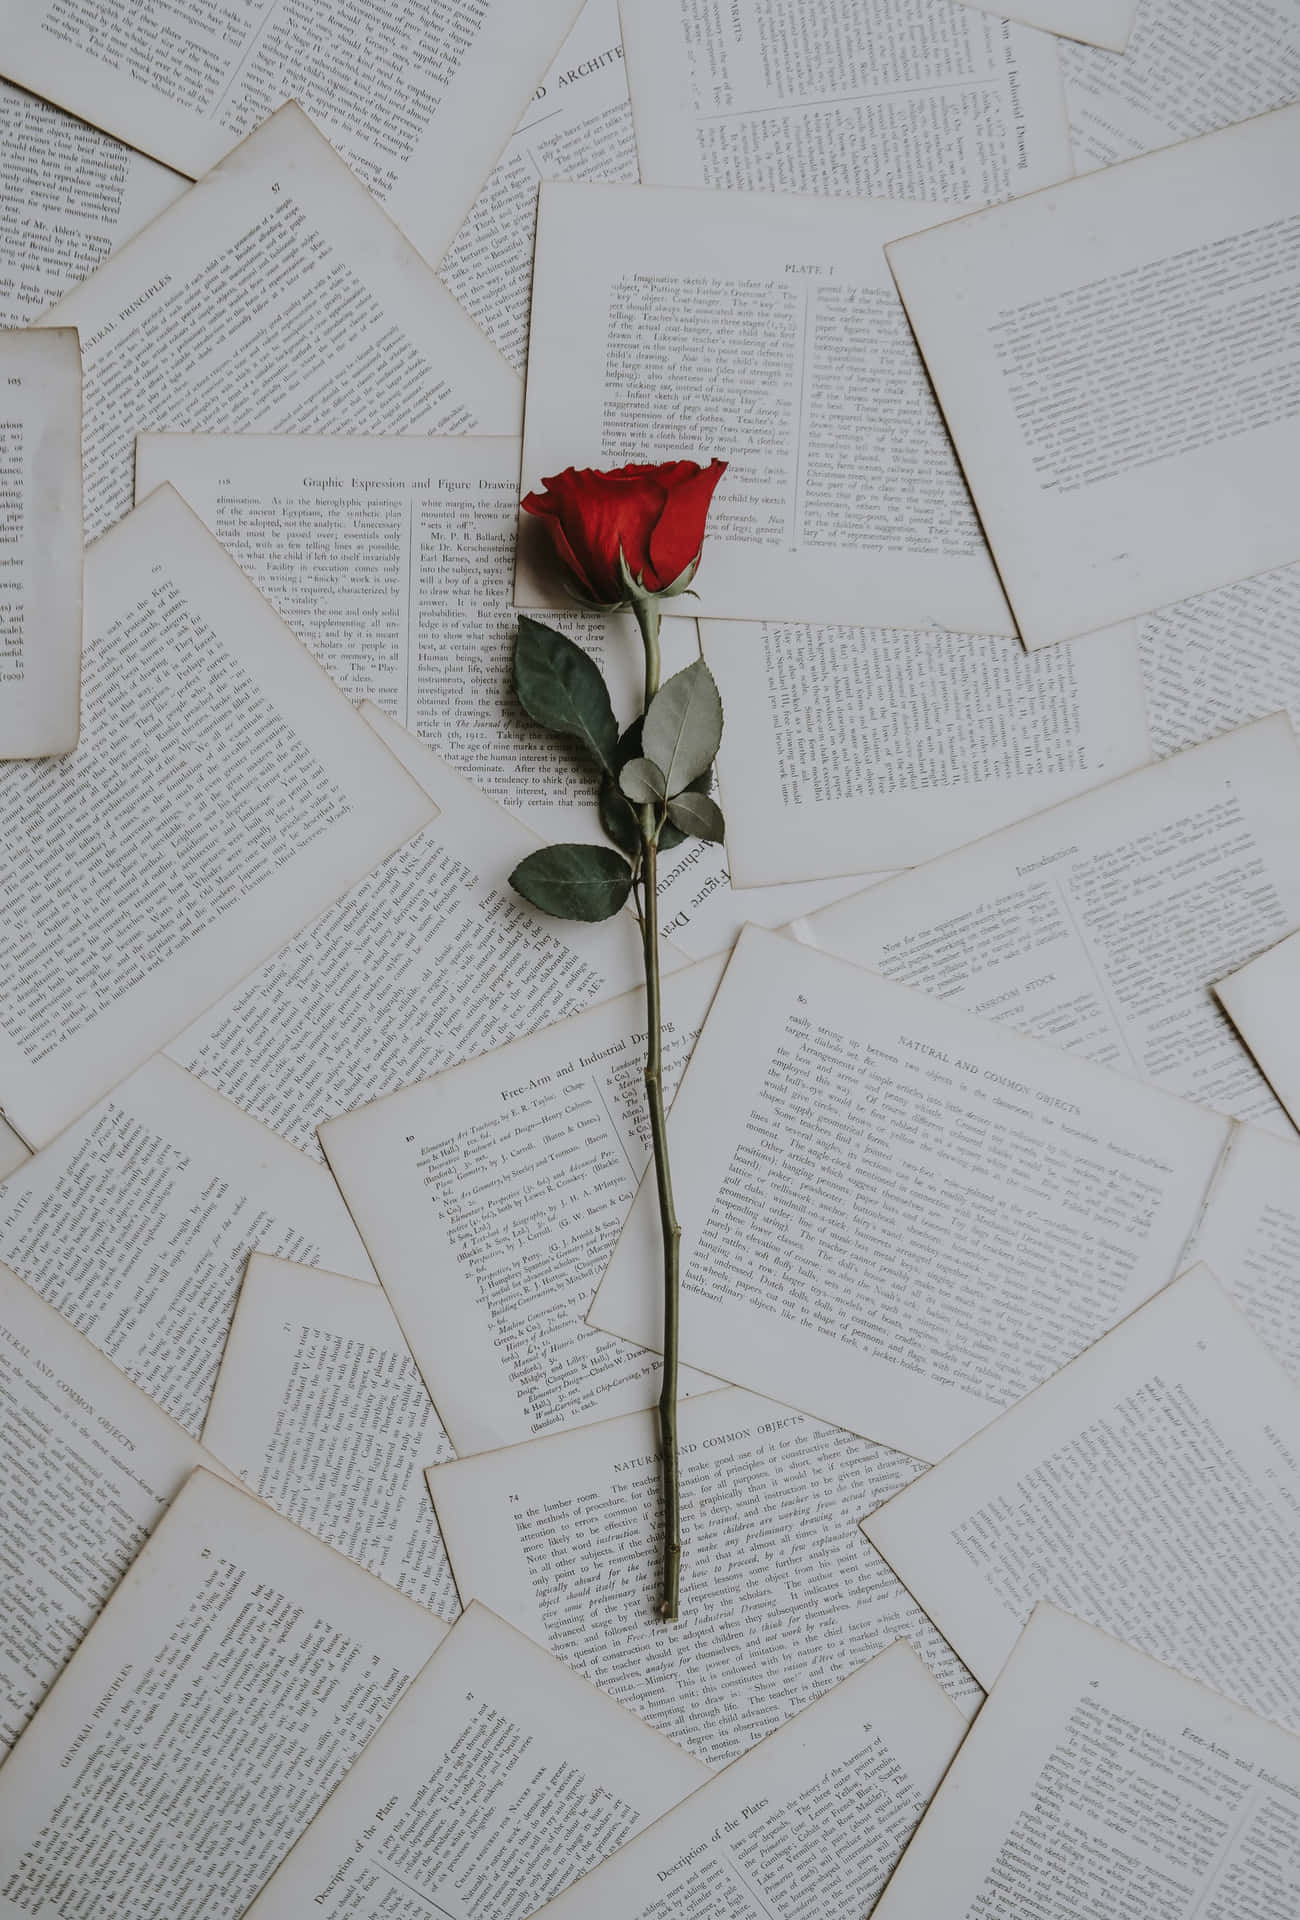 A Single Red Rose On A Pile Of Books